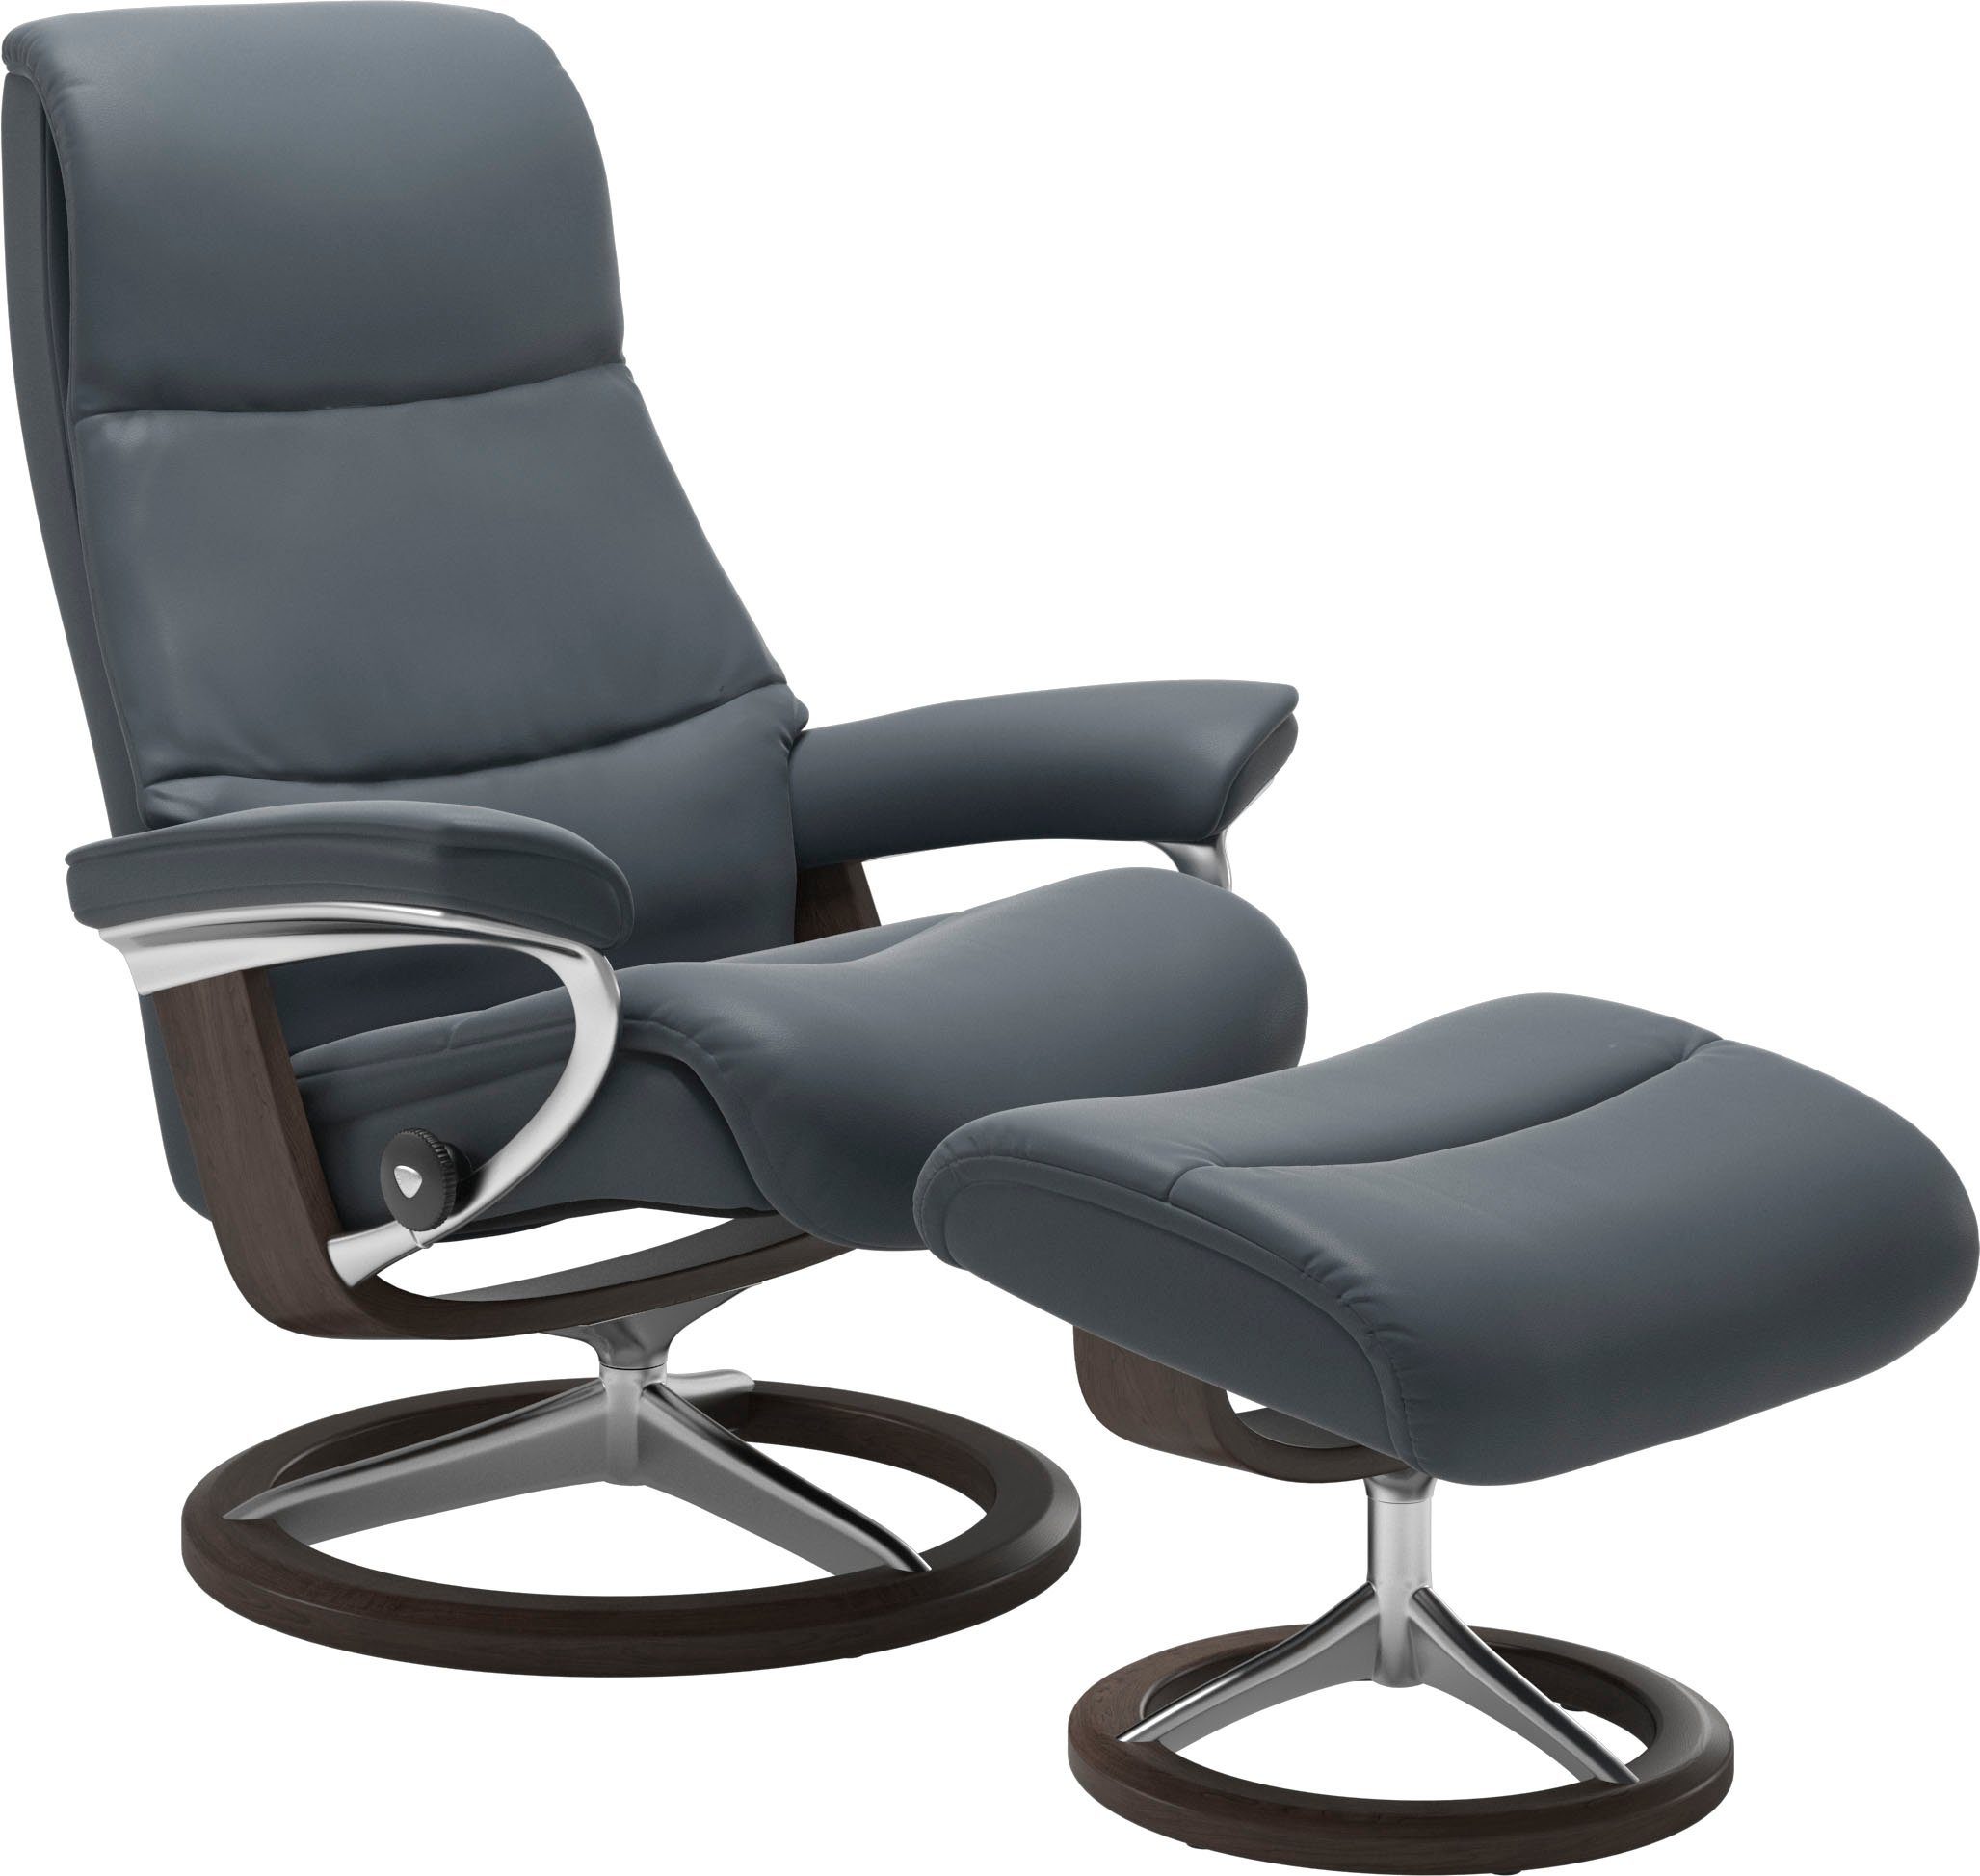 Signature Base, Wenge mit Größe View, S,Gestell Relaxsessel Stressless®